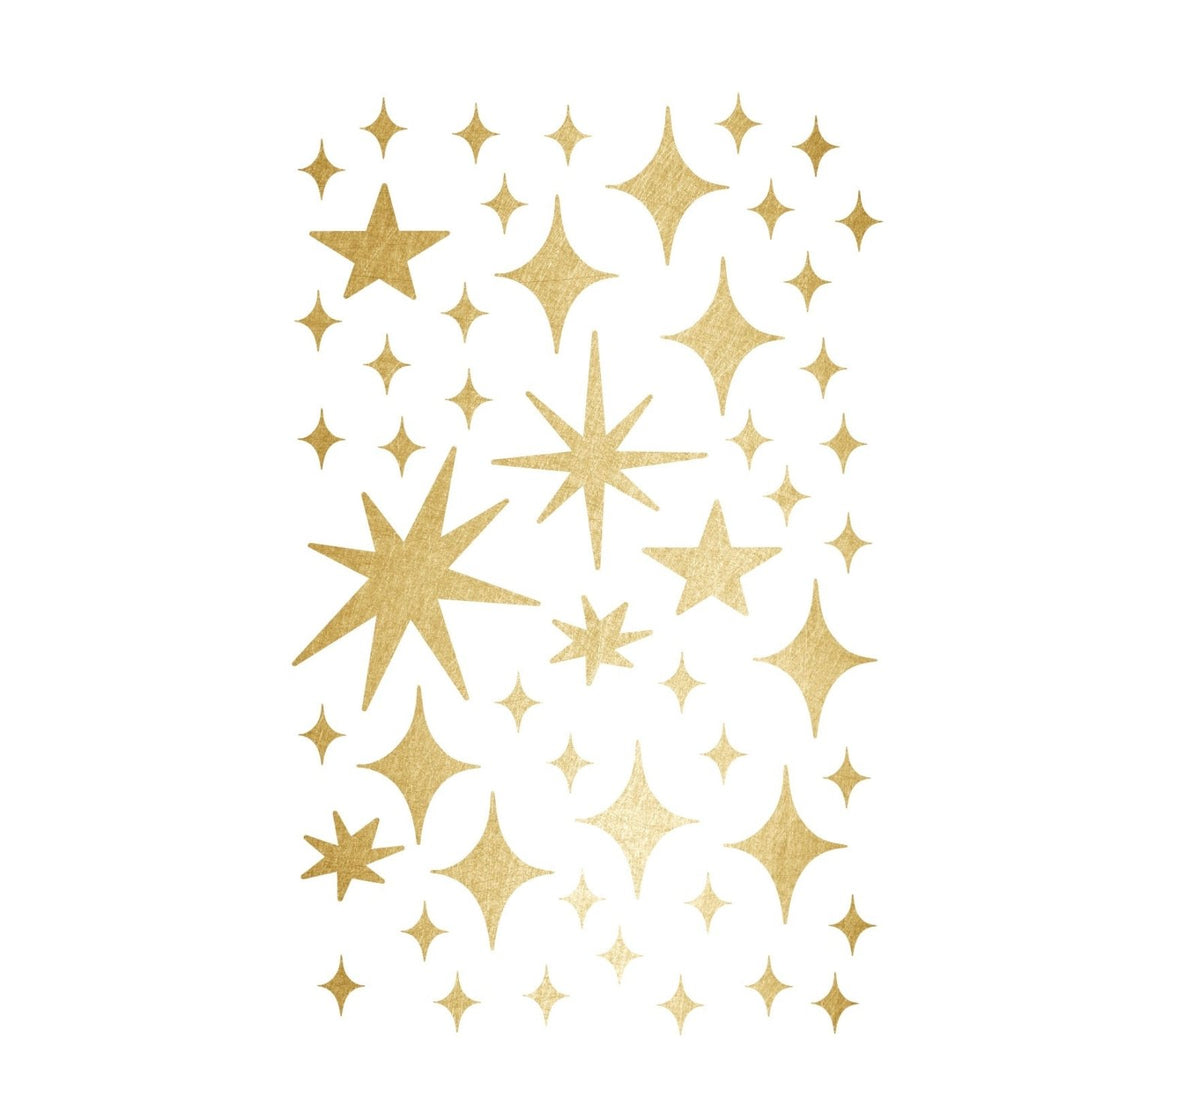 A collection of Cover-Alls Gold Twinkly Stars in various sizes and styles arranged in a magical scene on a white background.